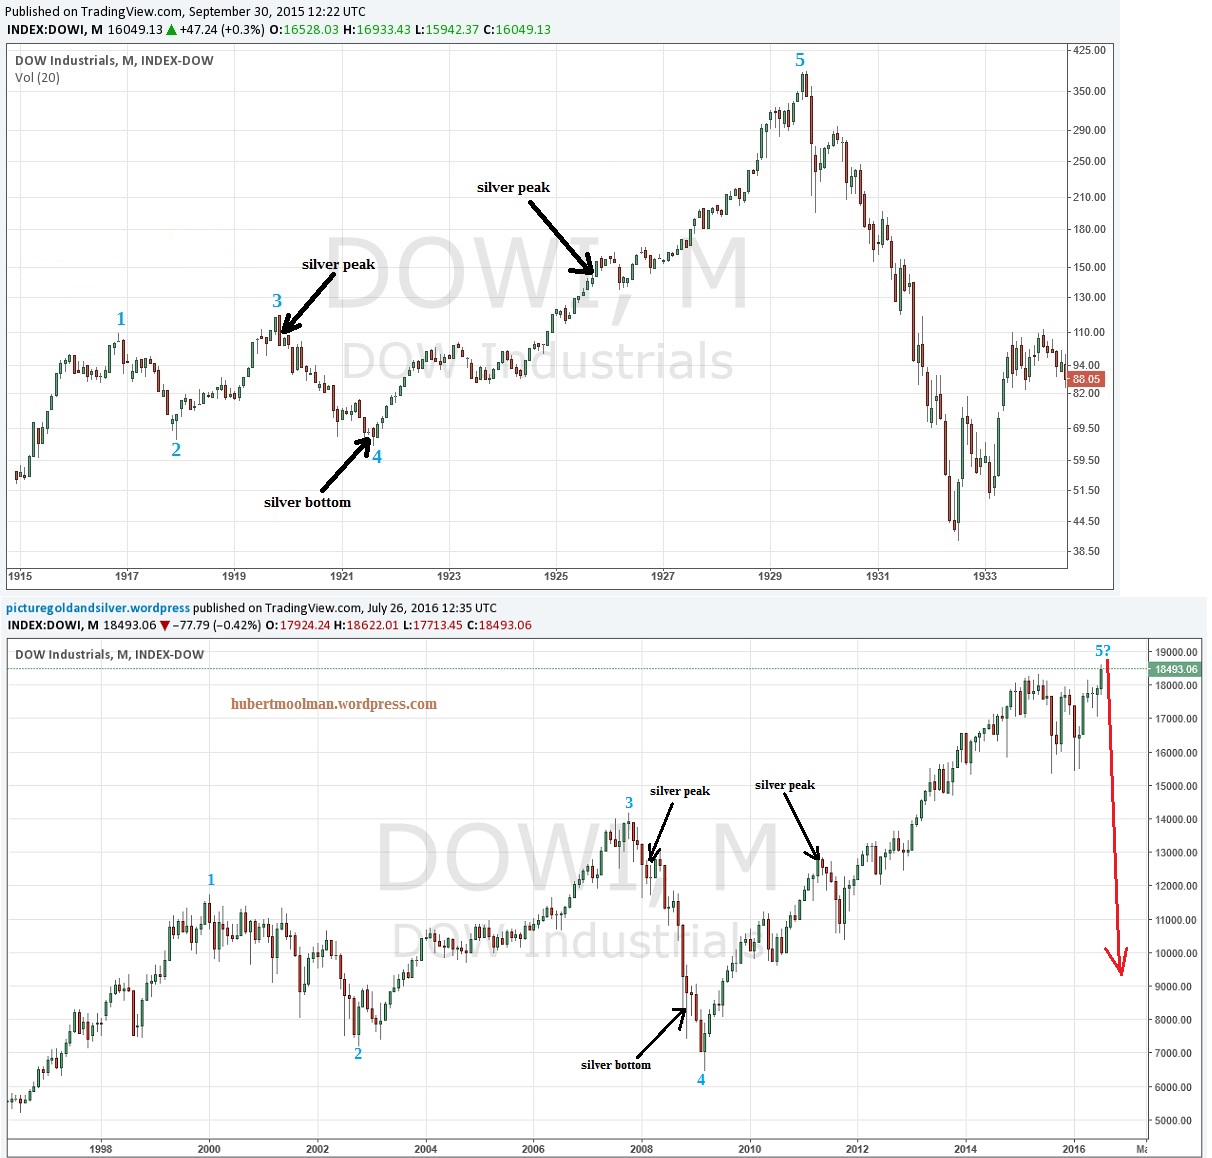 The Dow: Then And Now